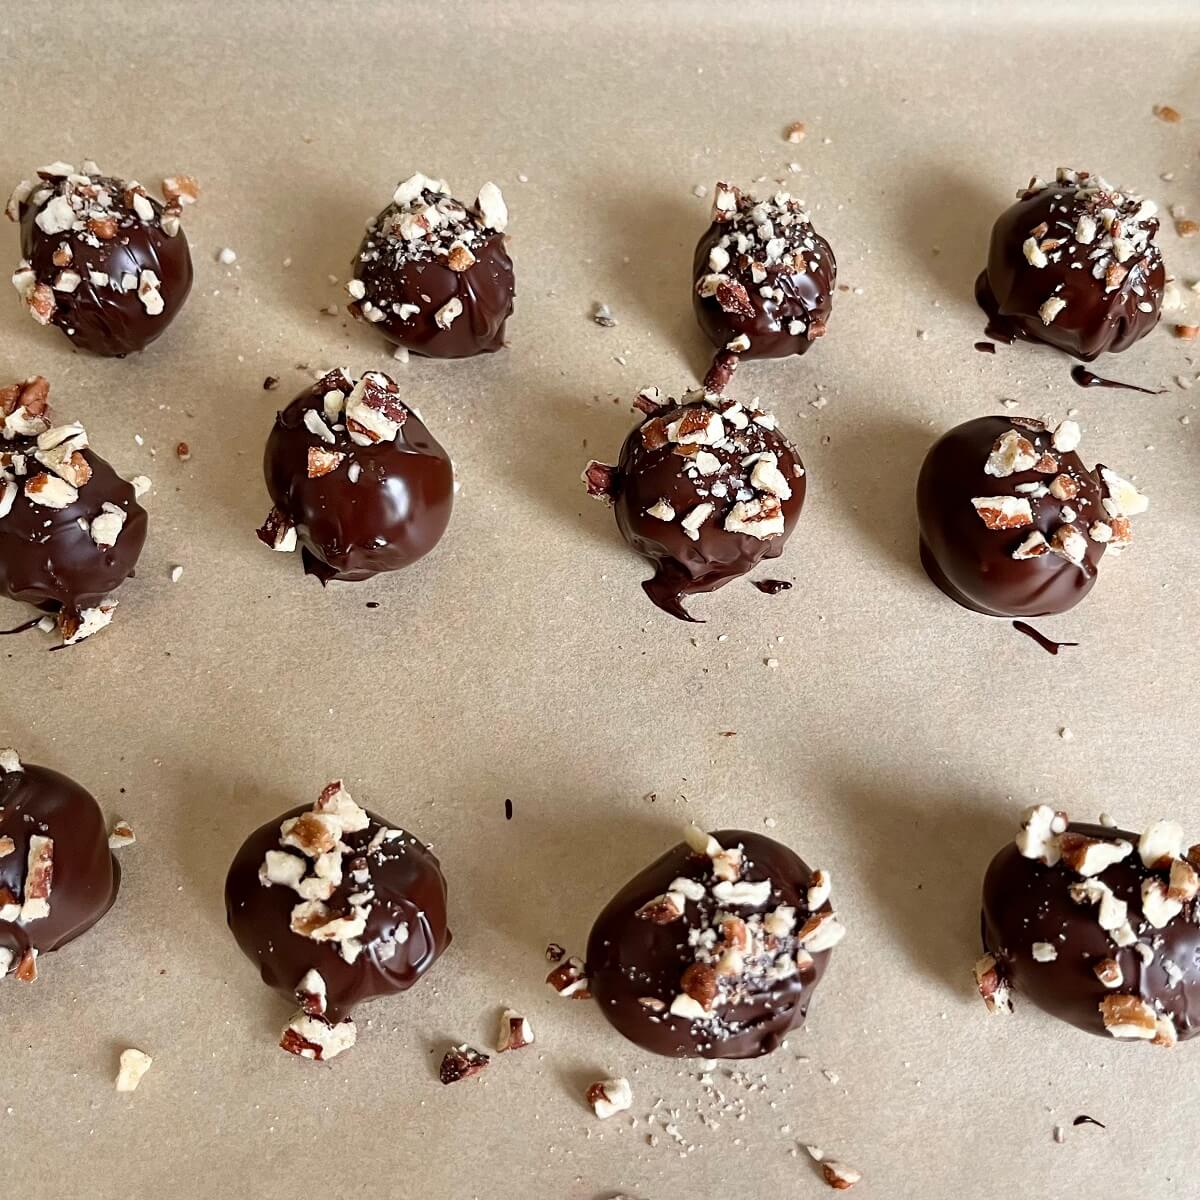 Grapes coated in chocolate and sprinkled with nuts on a sheet pan lined with parchment paper.